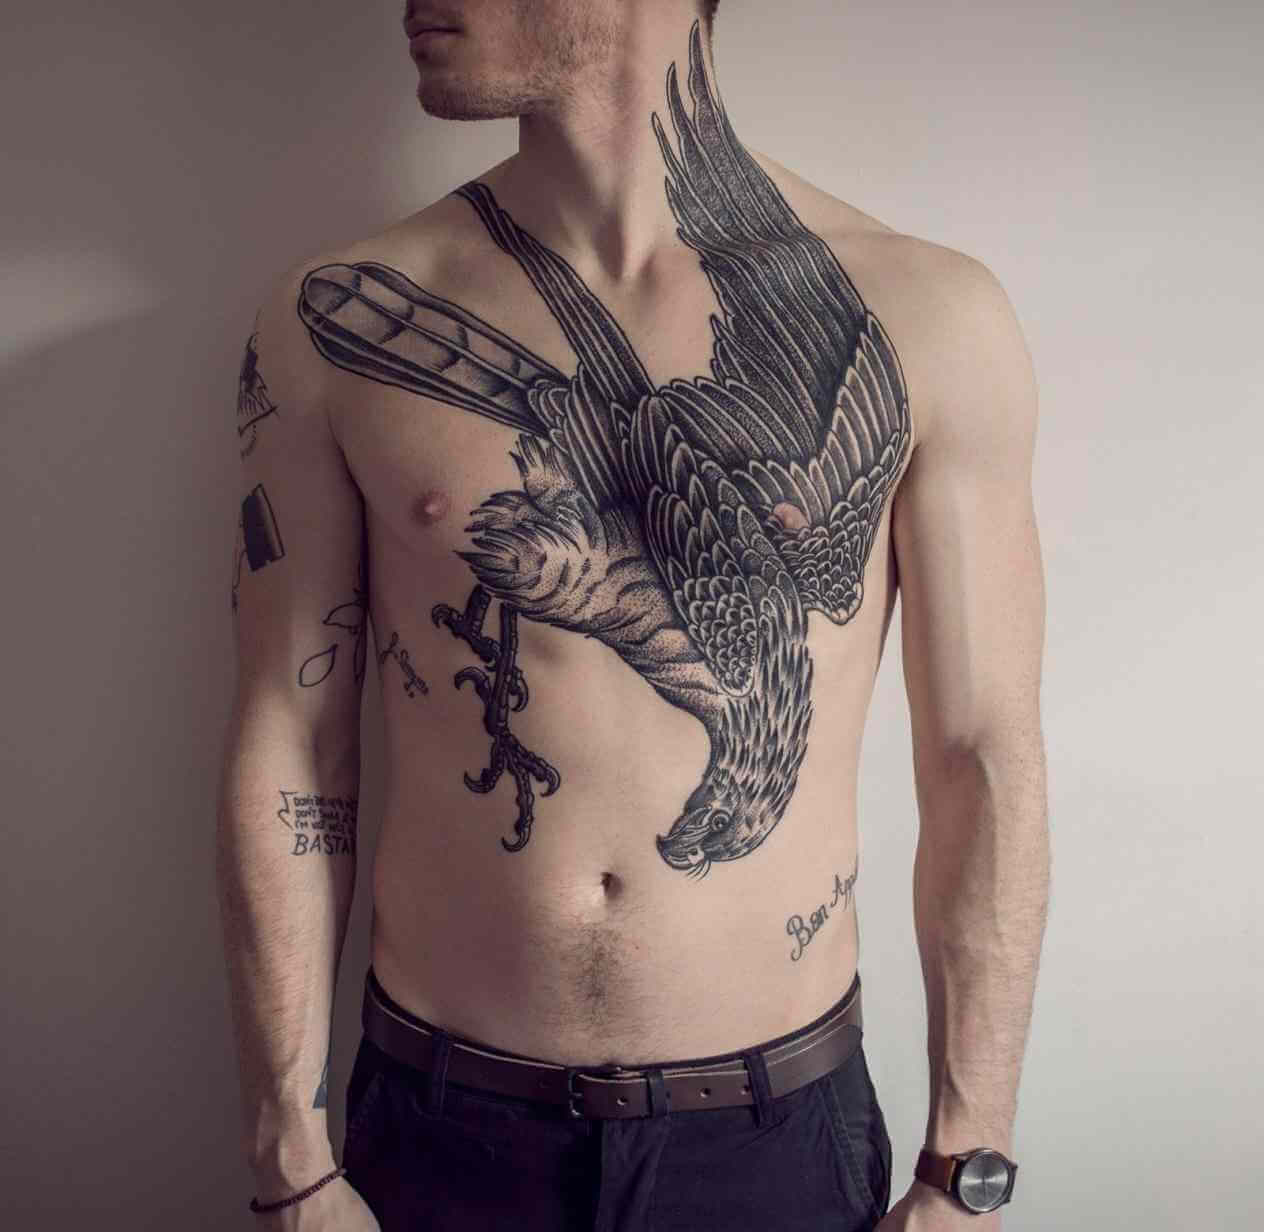 The 100 Best Chest Tattoos For Men Improb intended for size 1264 X 1232